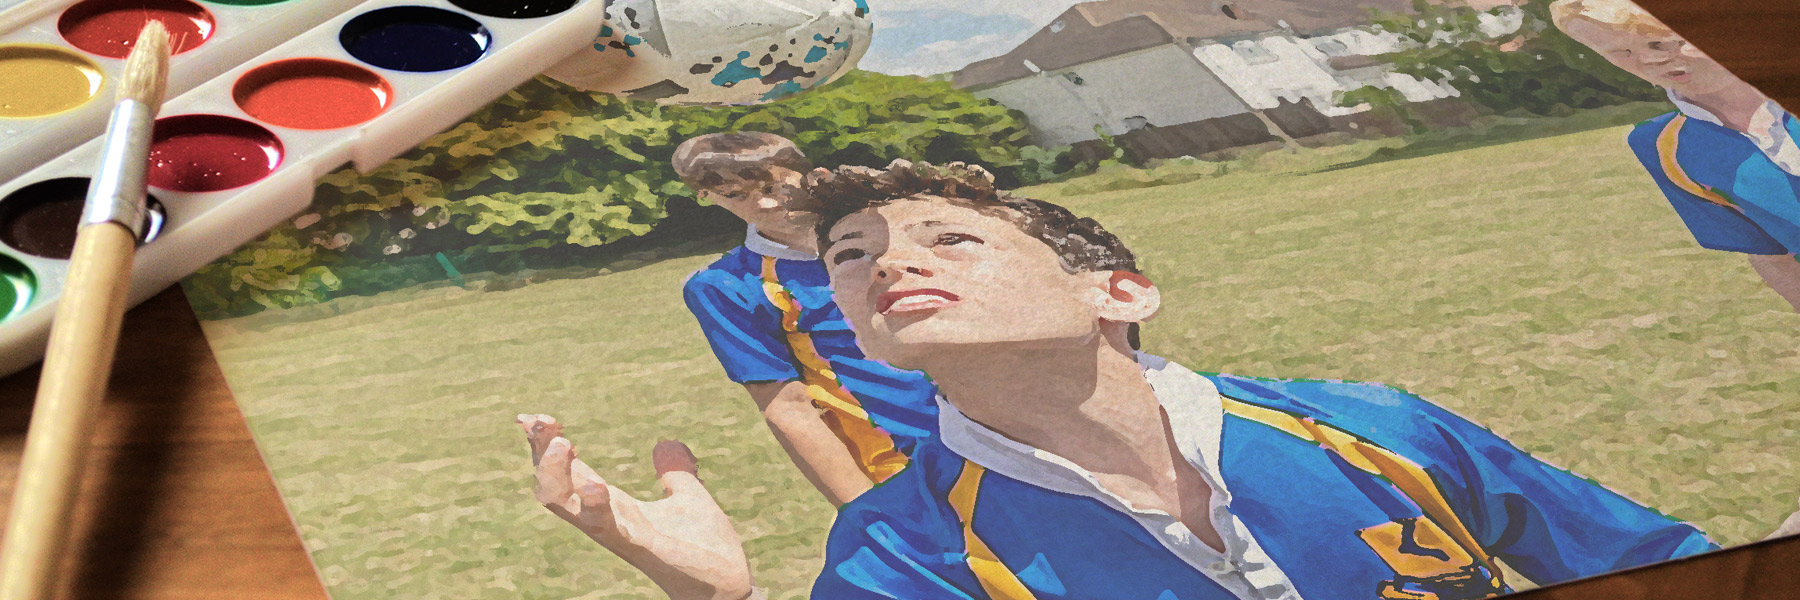 painted image of student heading football